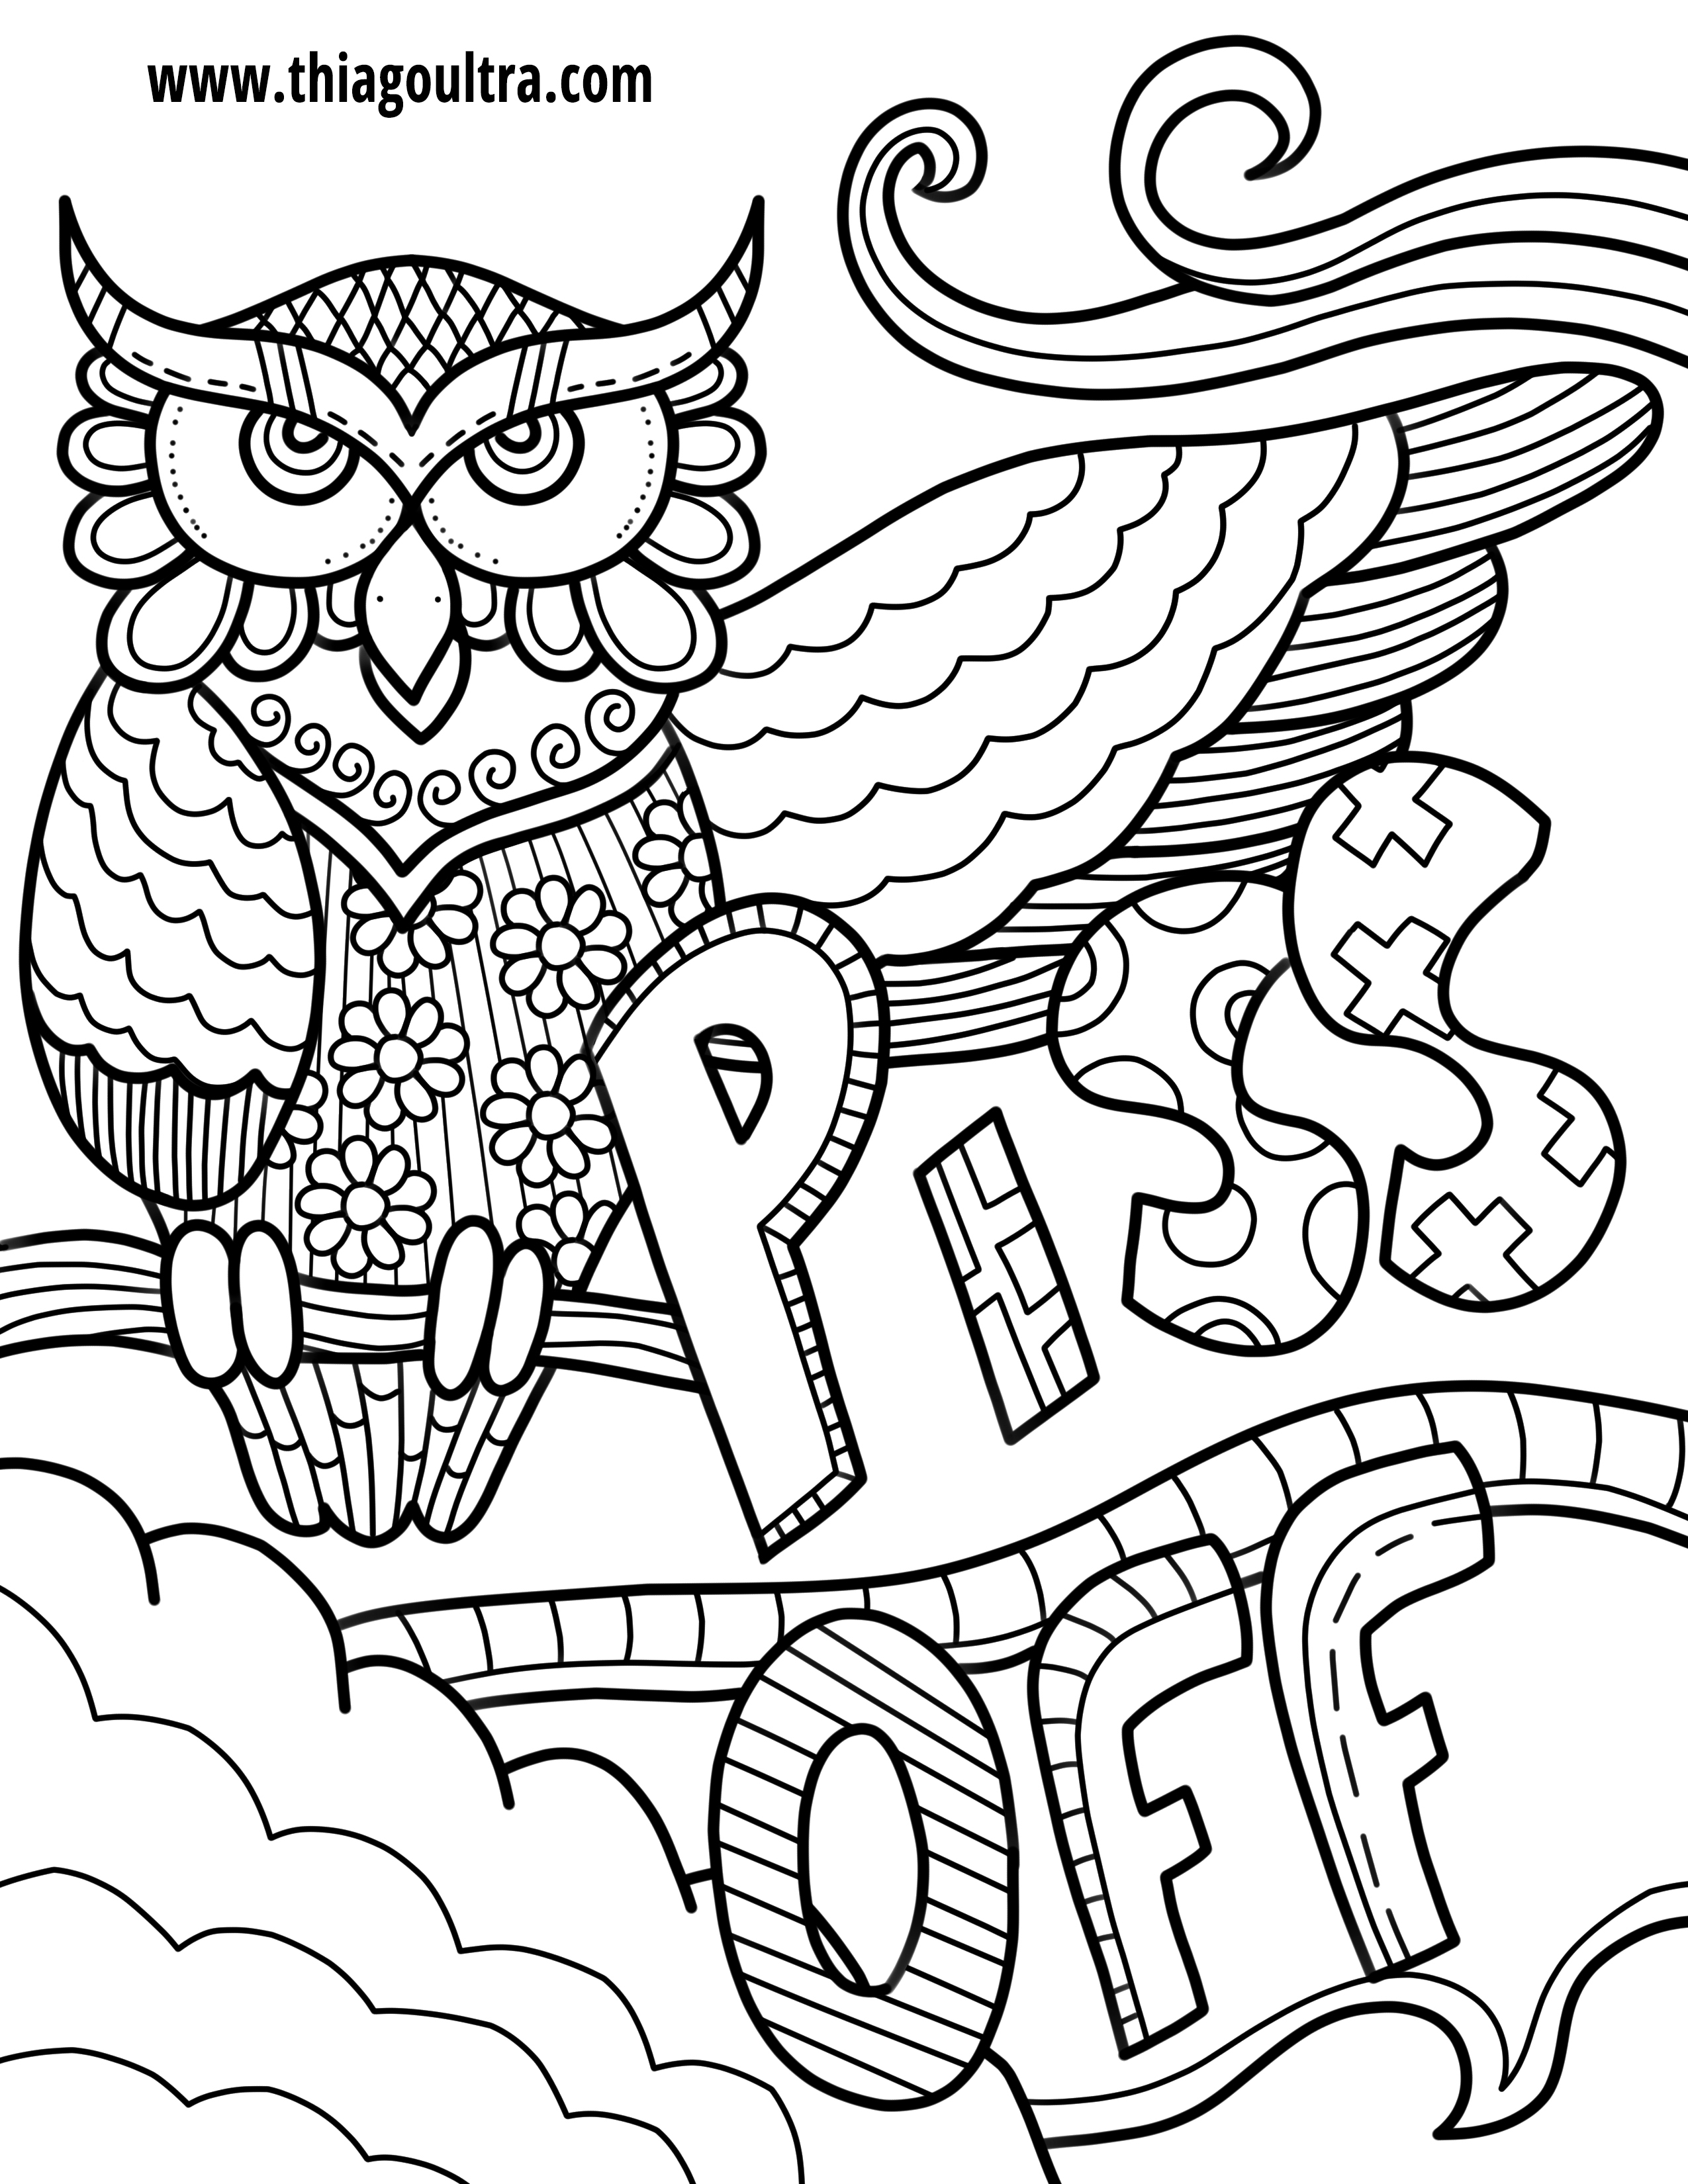 coloring pages pdf download